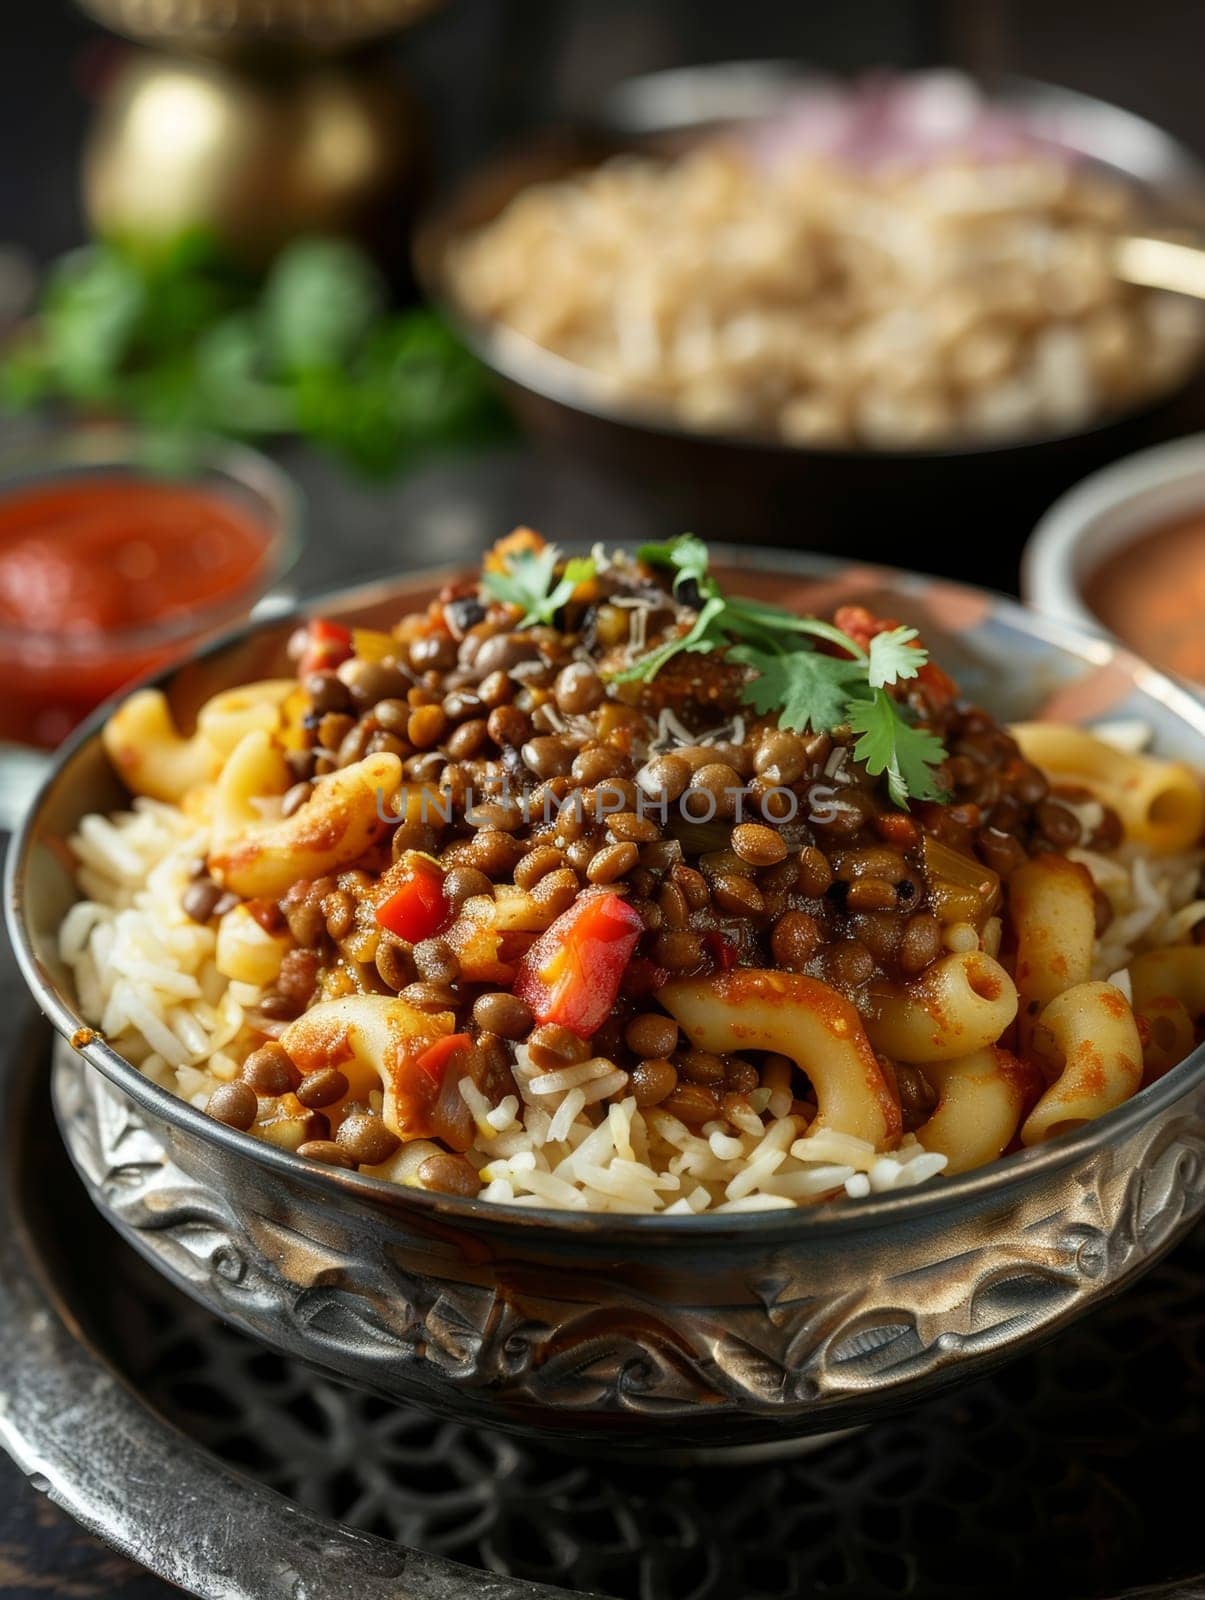 Authentic Egyptian koshari, a hearty, layered dish made with rice, macaroni, lentils, and topped with a spicy tomato sauce - a comforting, vegetarian and vegan friendly staple of Egyptian cuisine. by sfinks